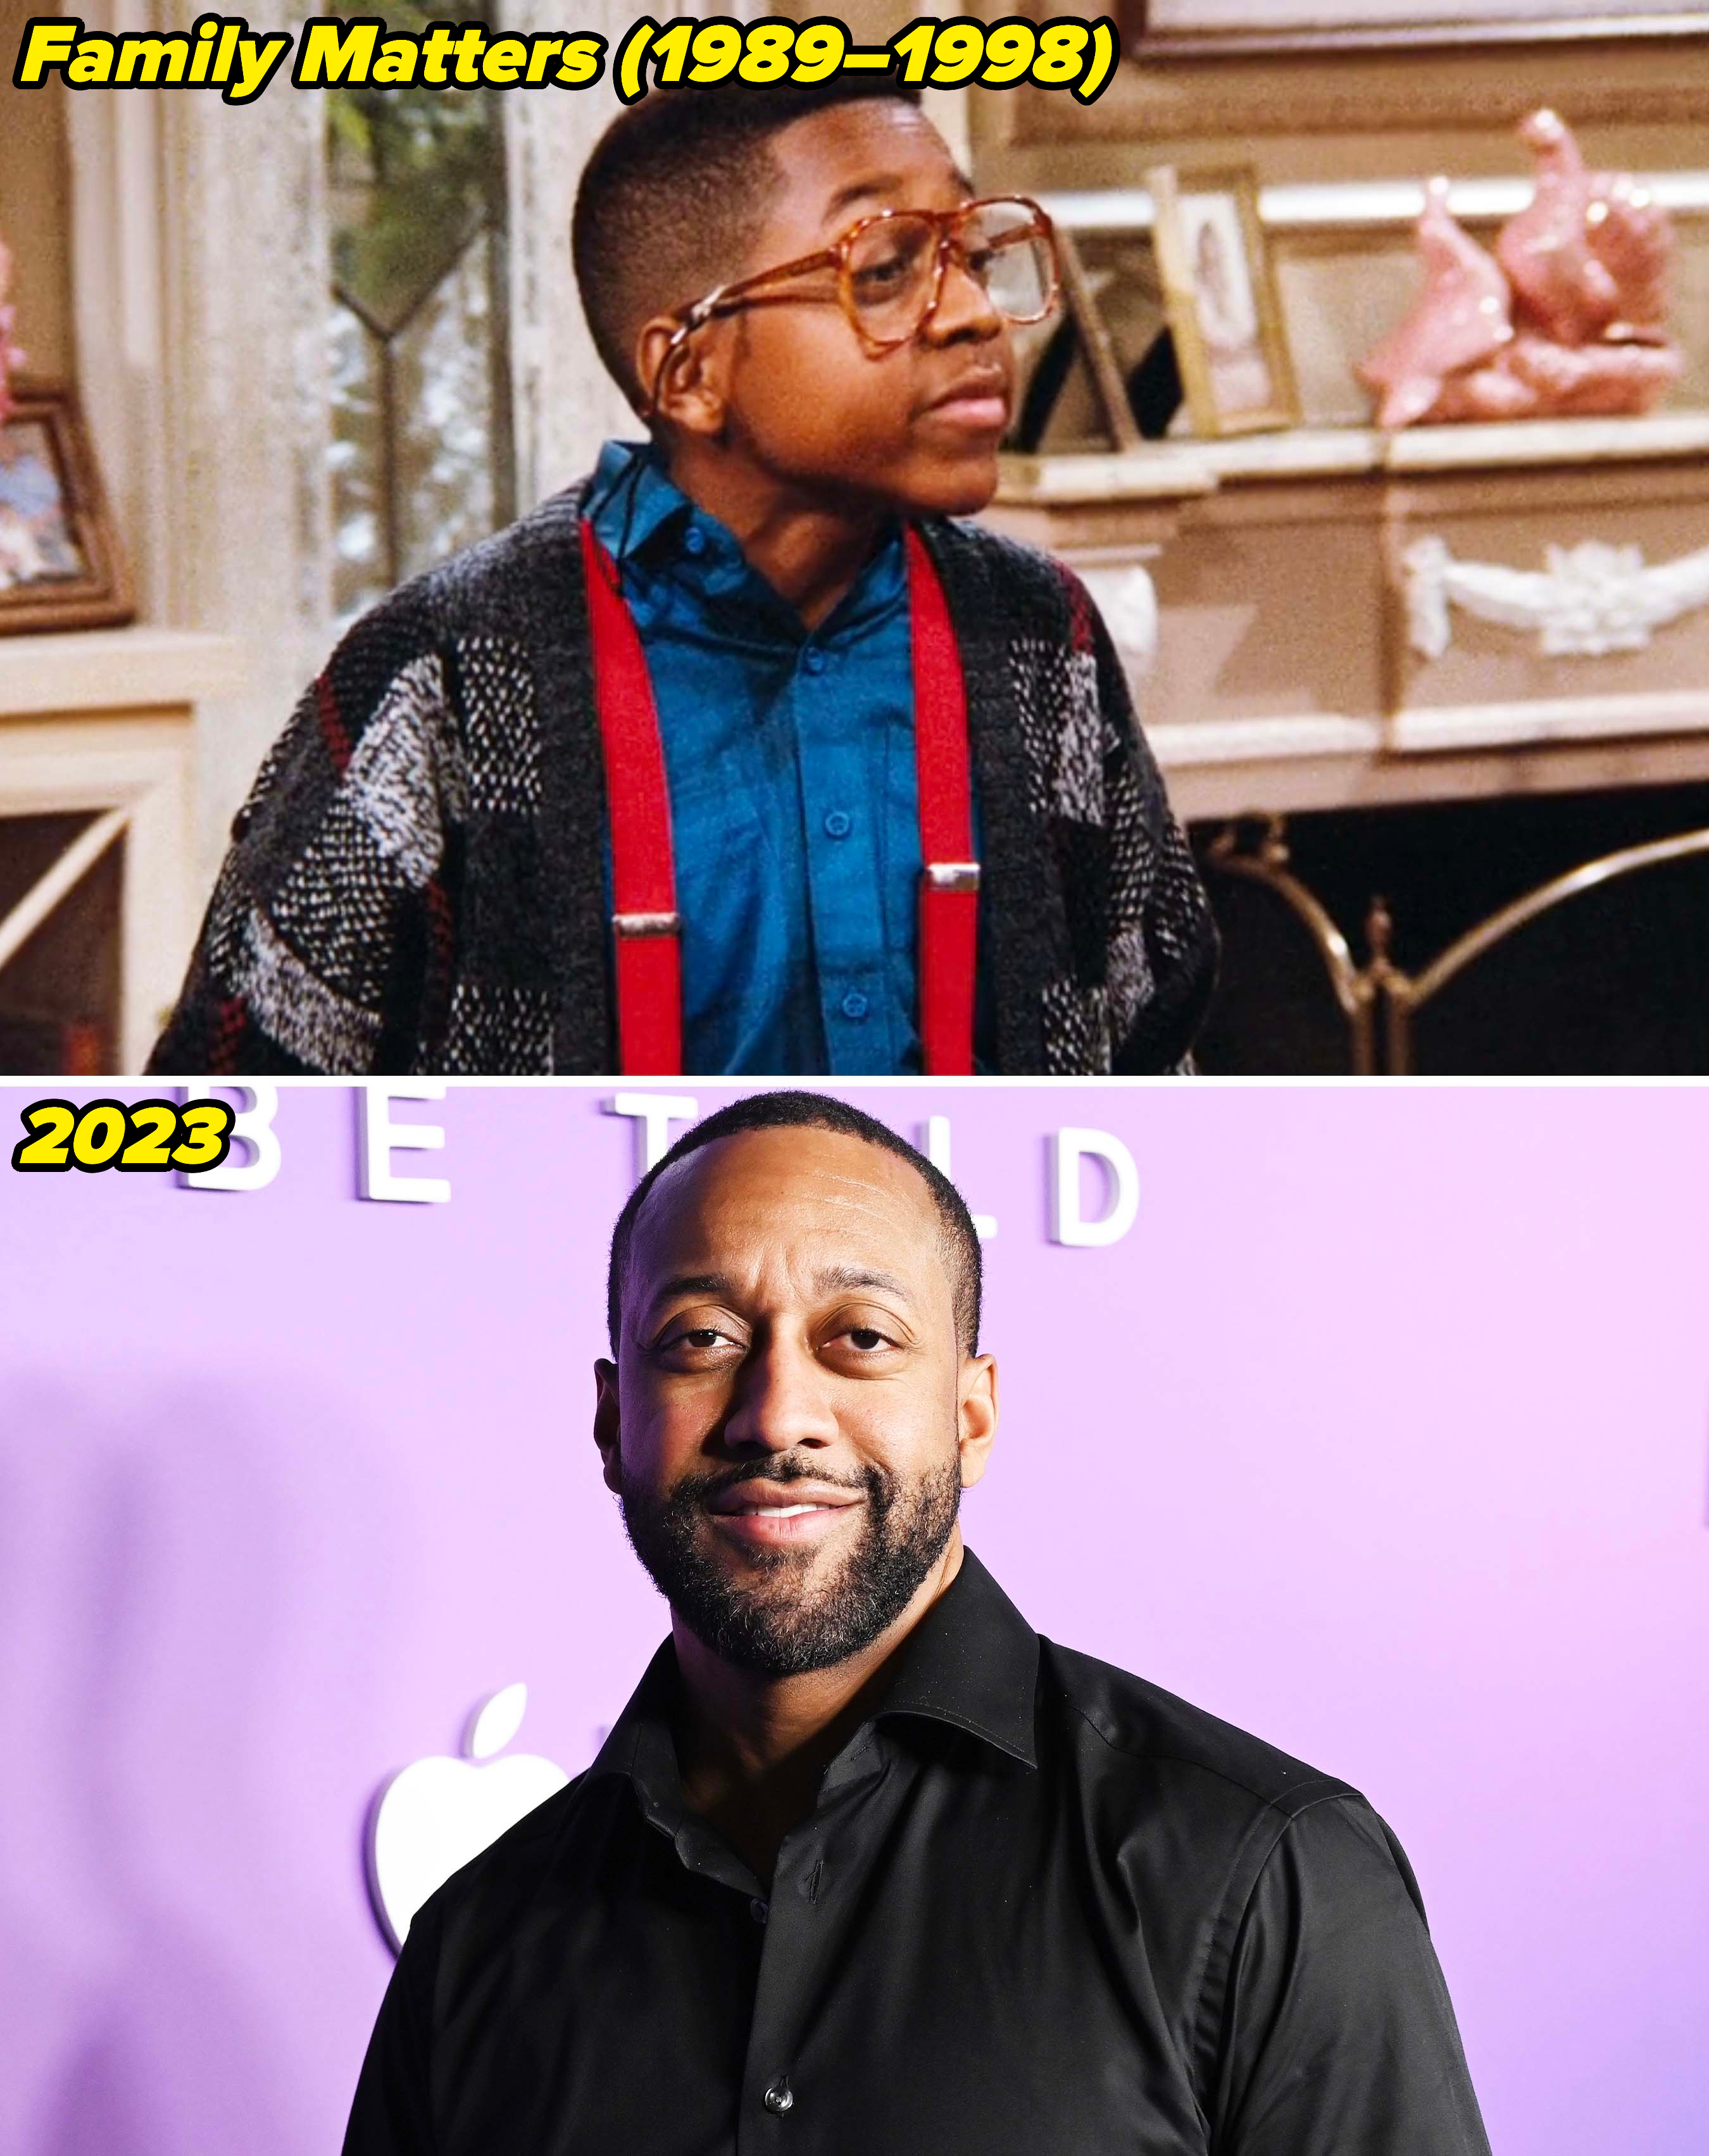 Jaleel in Family Matters from 1989–1998 and at a media event in 2023